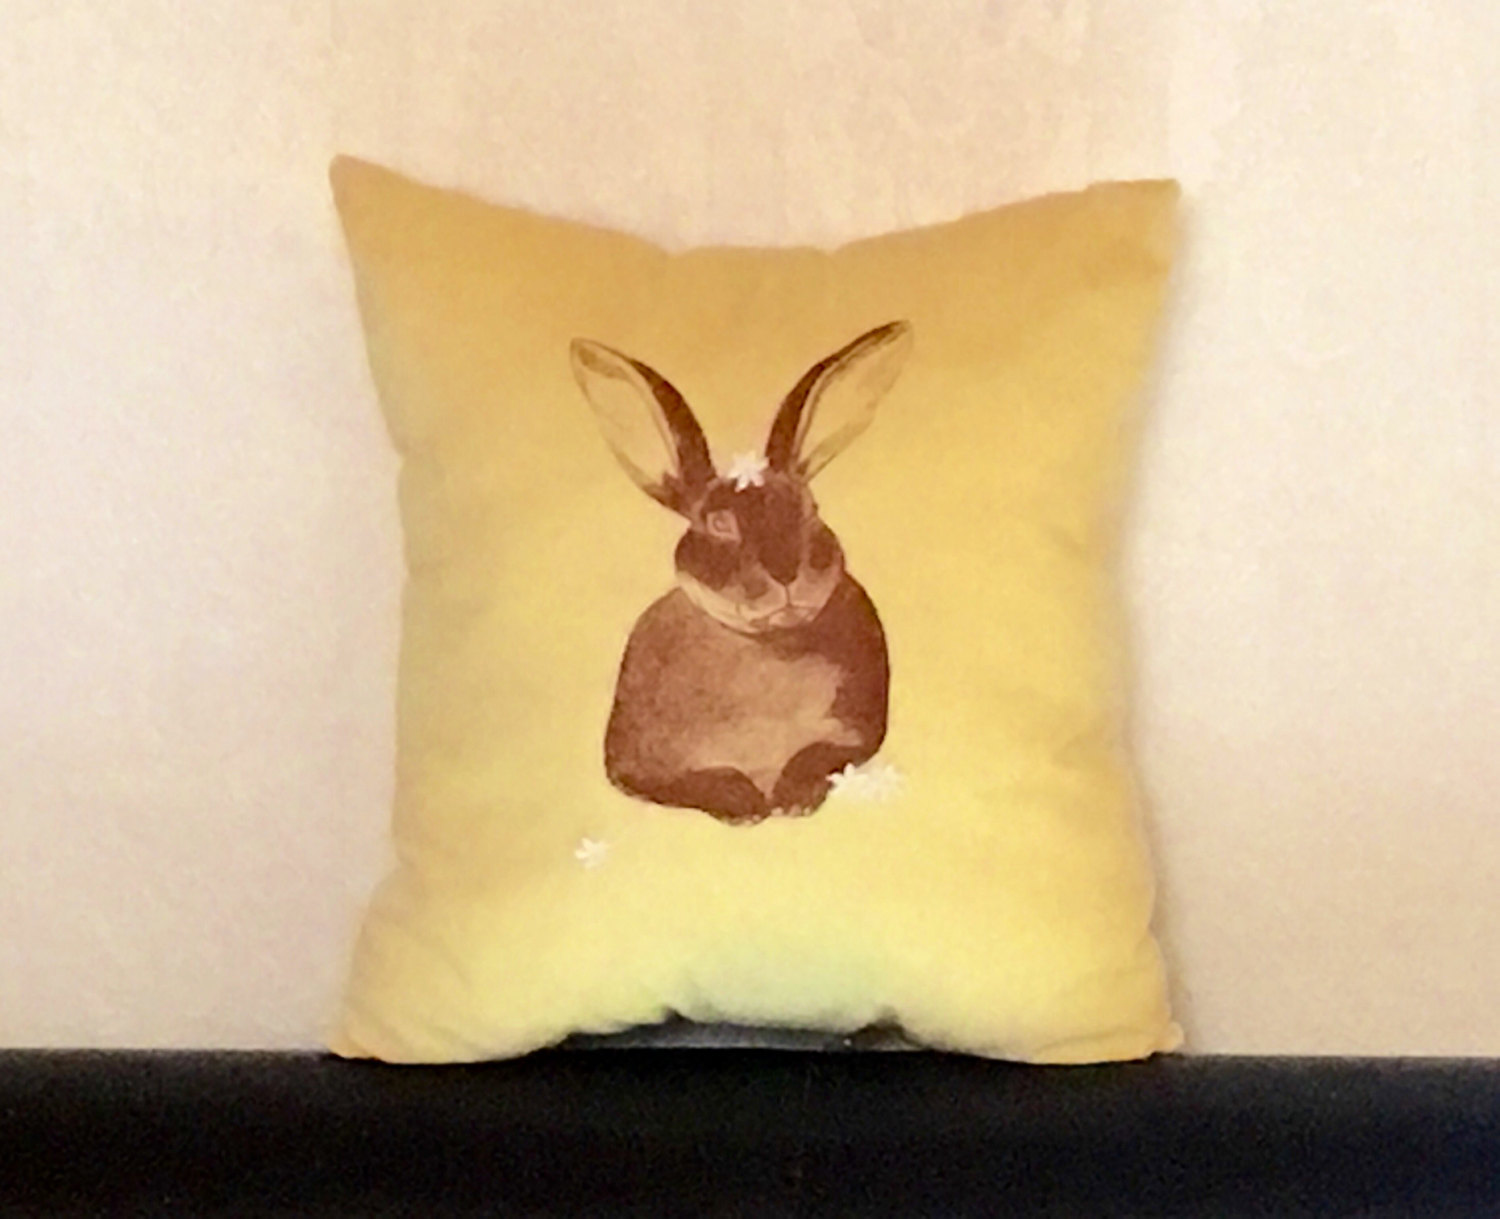 Bunny cushion, Screenprinted Cotton Rabbit, Organic Lavender Bag polyester, home decor,  ' Bunny loves blossoms', gift for bunny lover